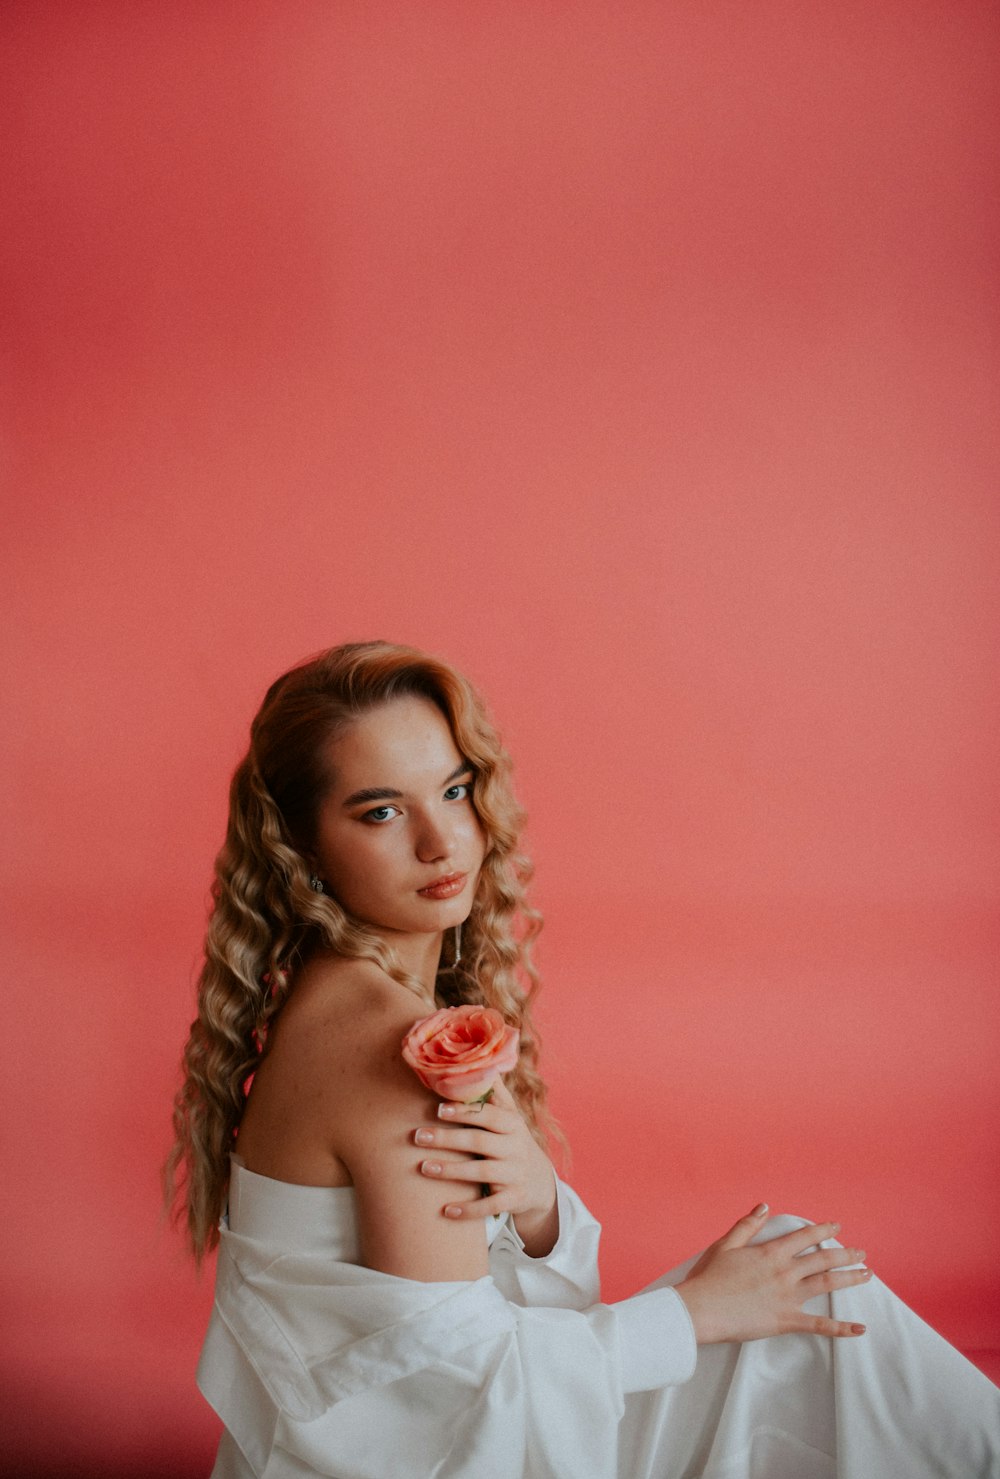 a woman in a white dress holding a rose